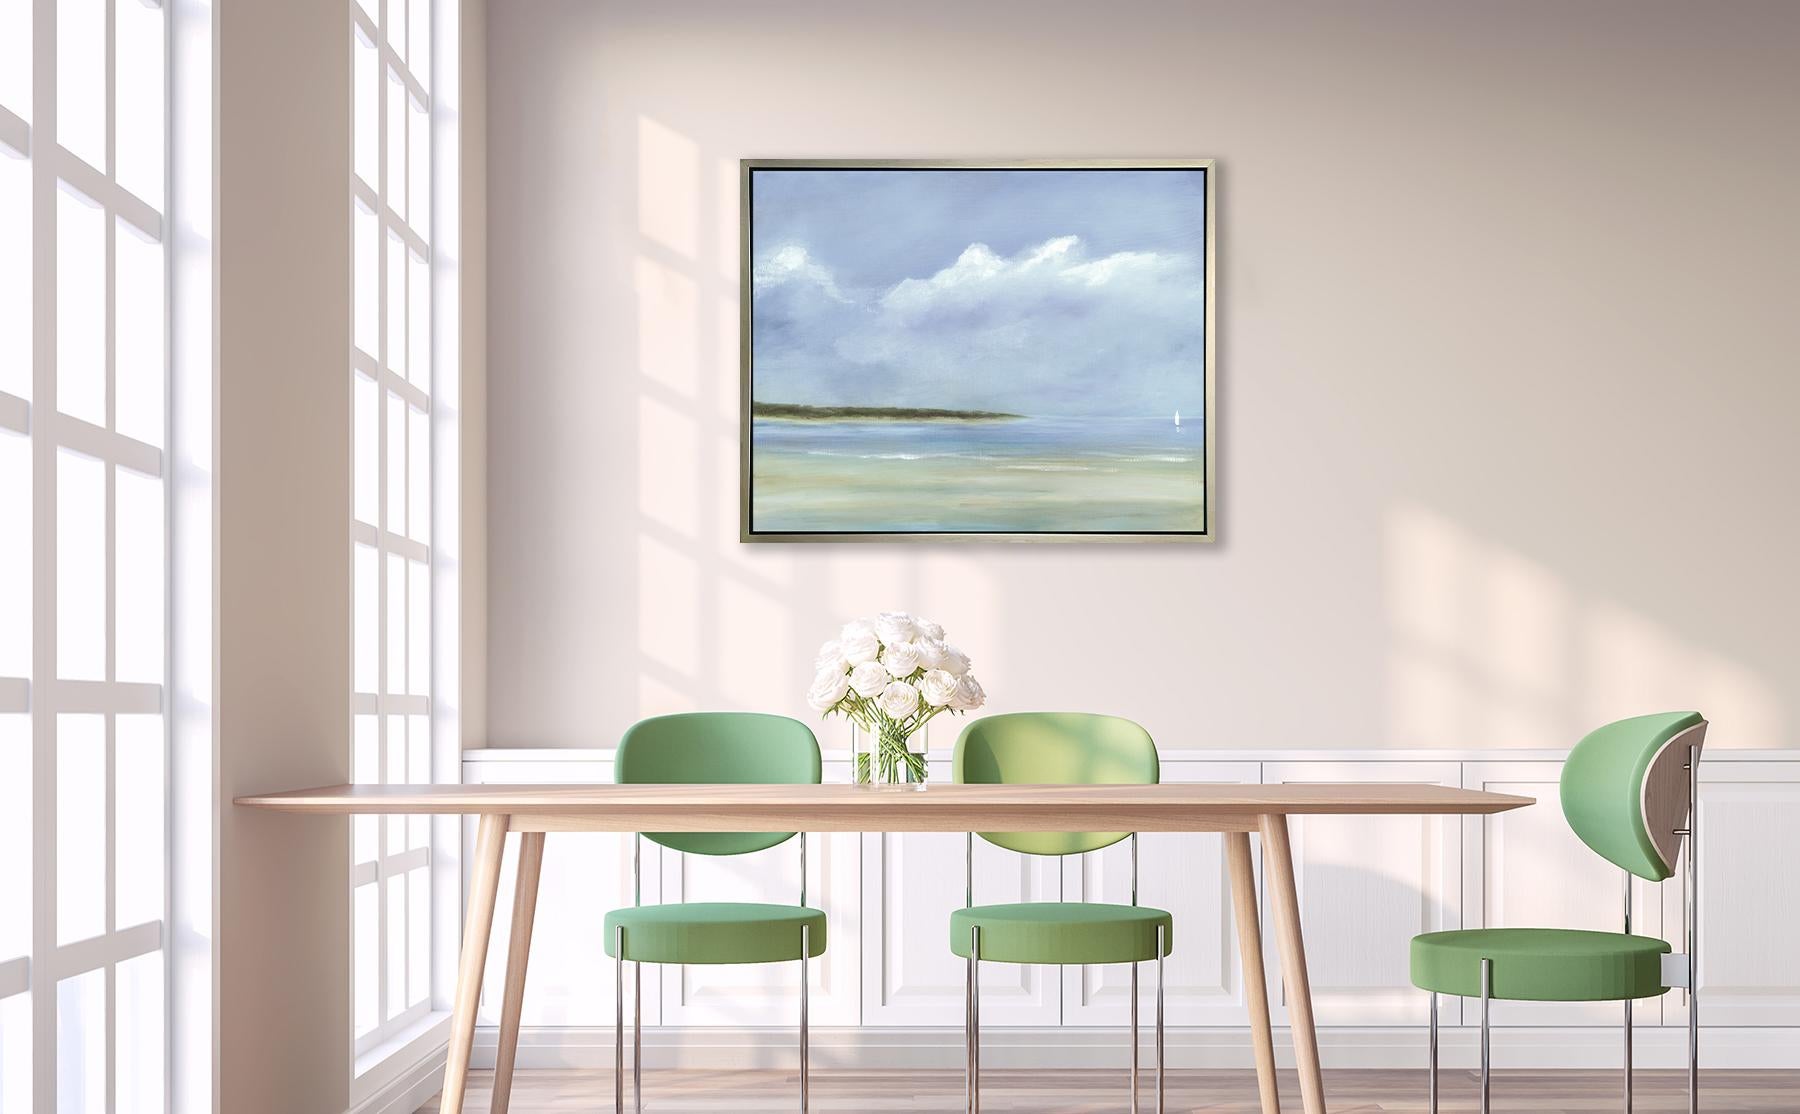 This limited edition seascape print by S.C. Aldo captures a coastal scene overlooking water from a sandy shore, with green trees lining part of the horizon and a sailboat sailing in the distance. Aldo's signature style borders on Impressionistic,